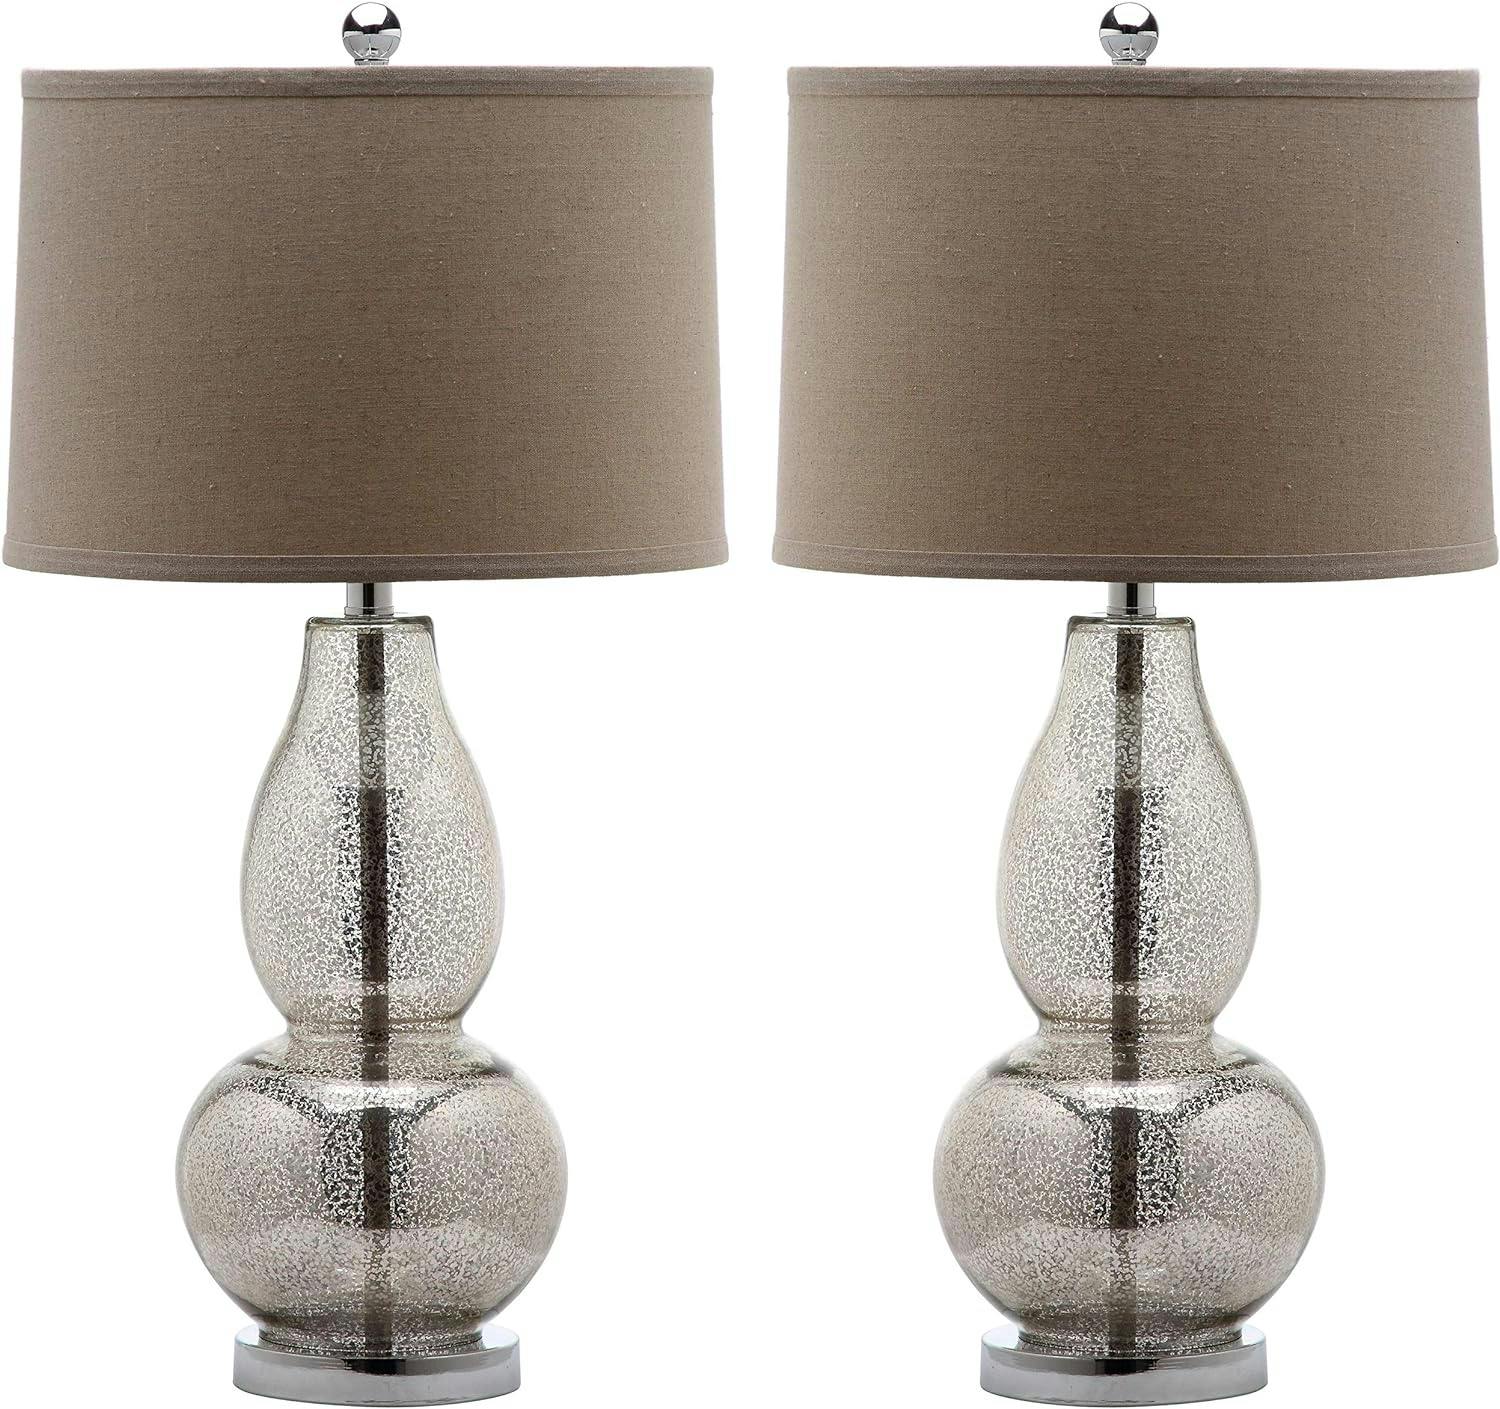 Antique Silver Wheat Double Gourd Table Lamp Set, 28.5"